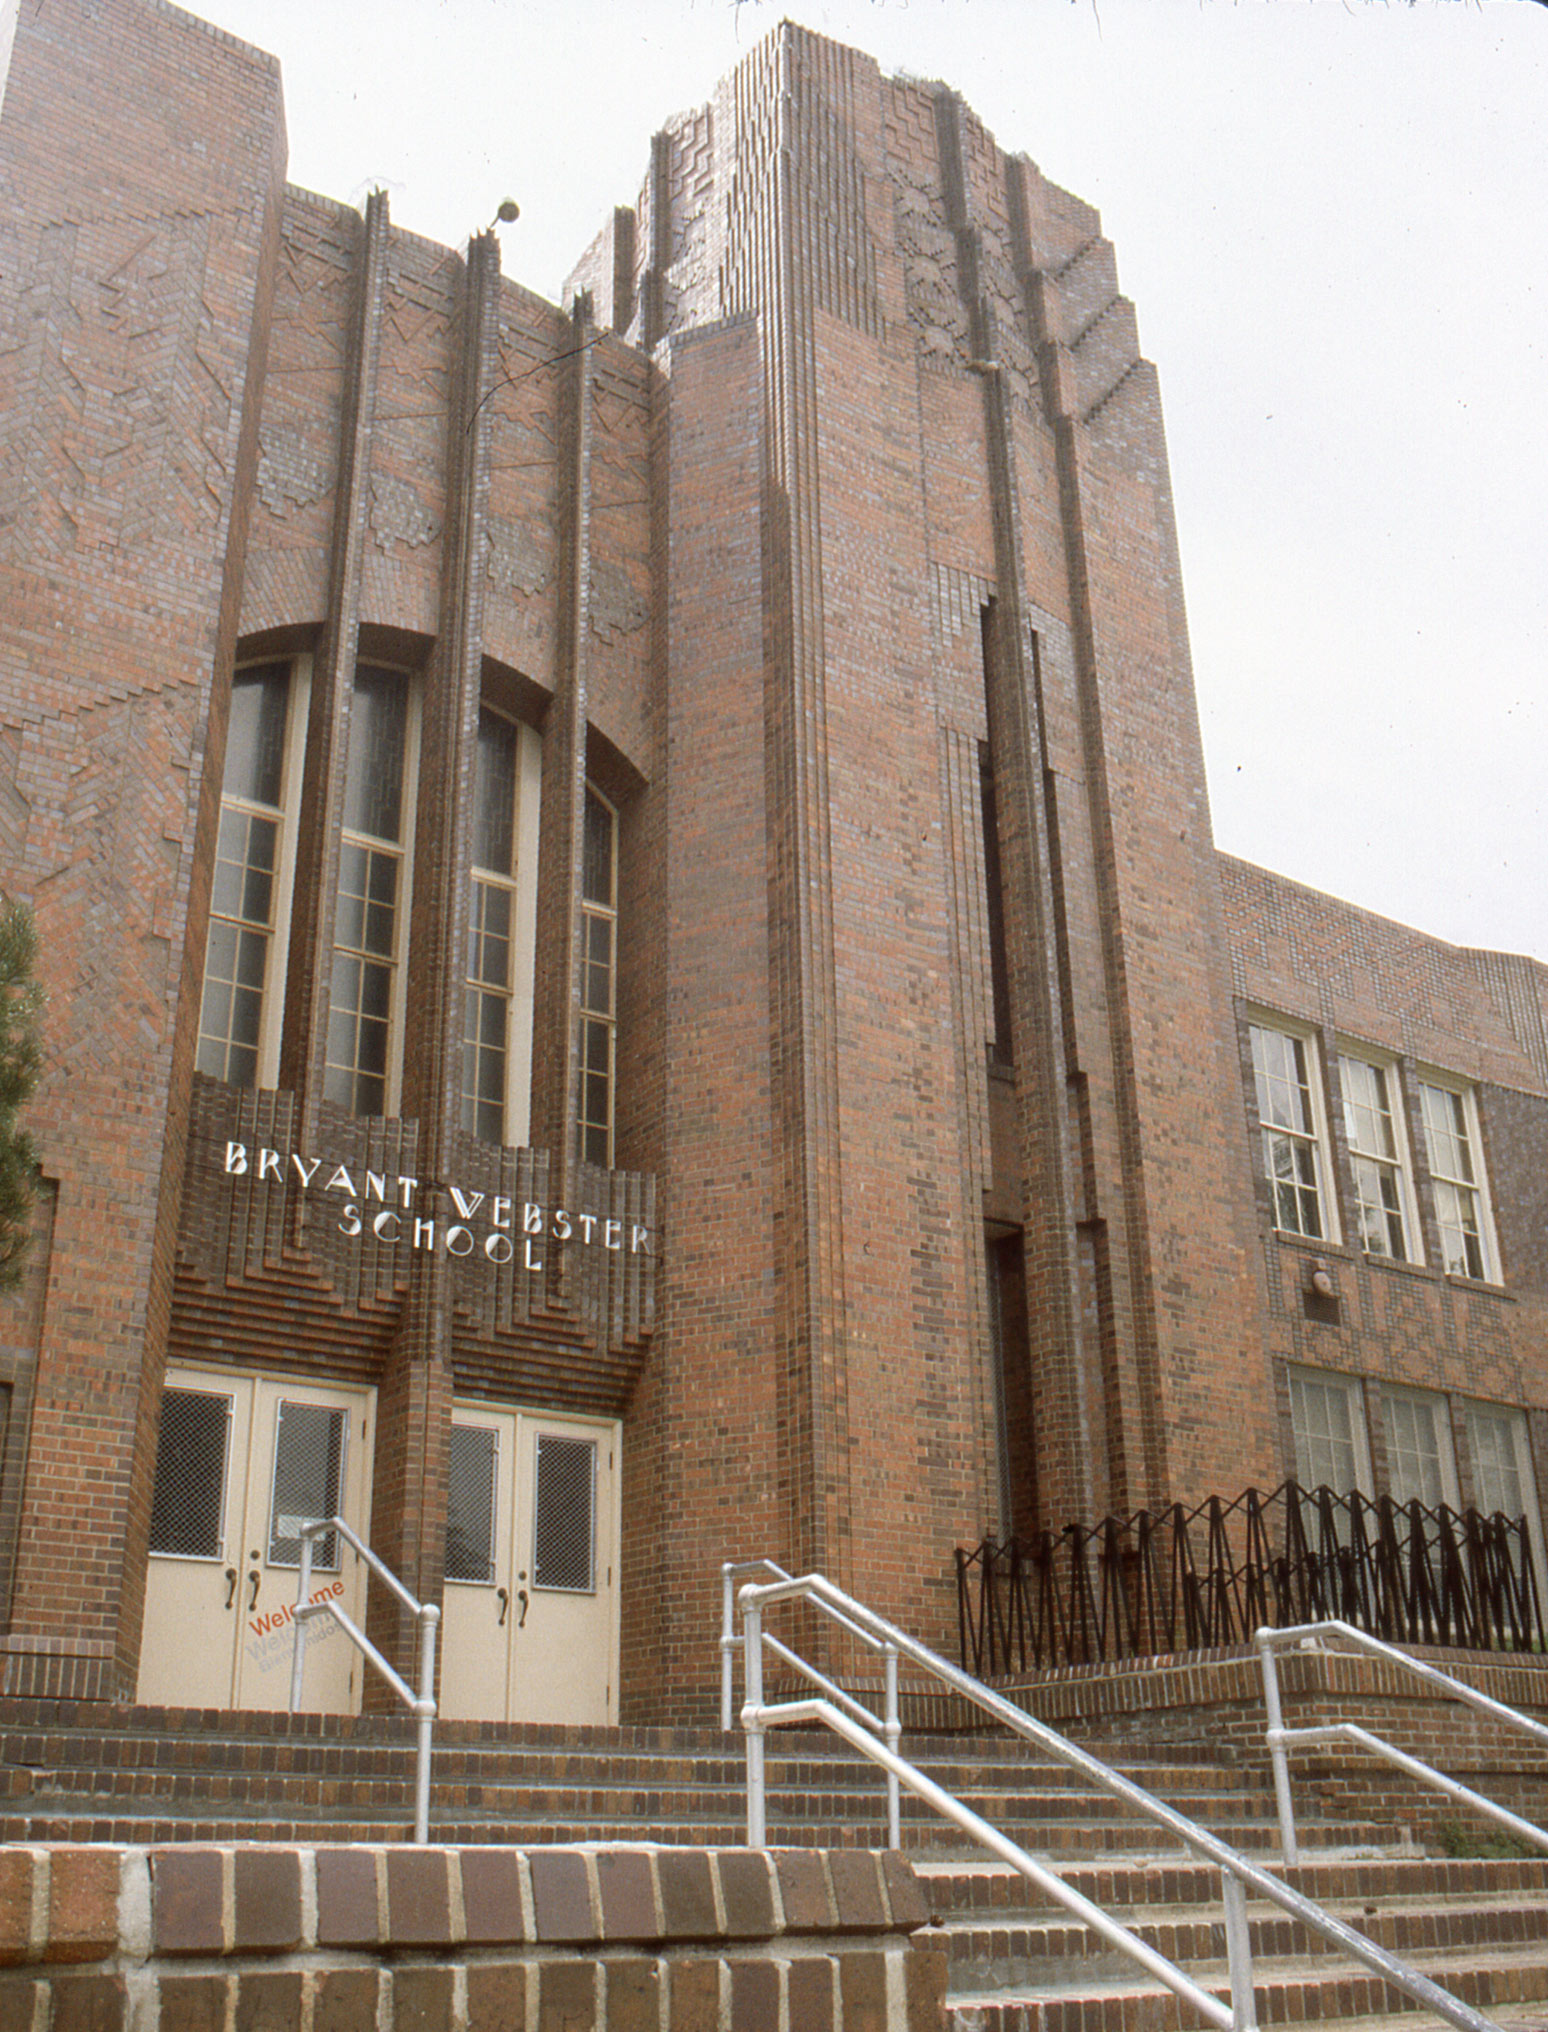 The Bryant Webster Elementary School is a Denver example of the Art Deco architectural style.